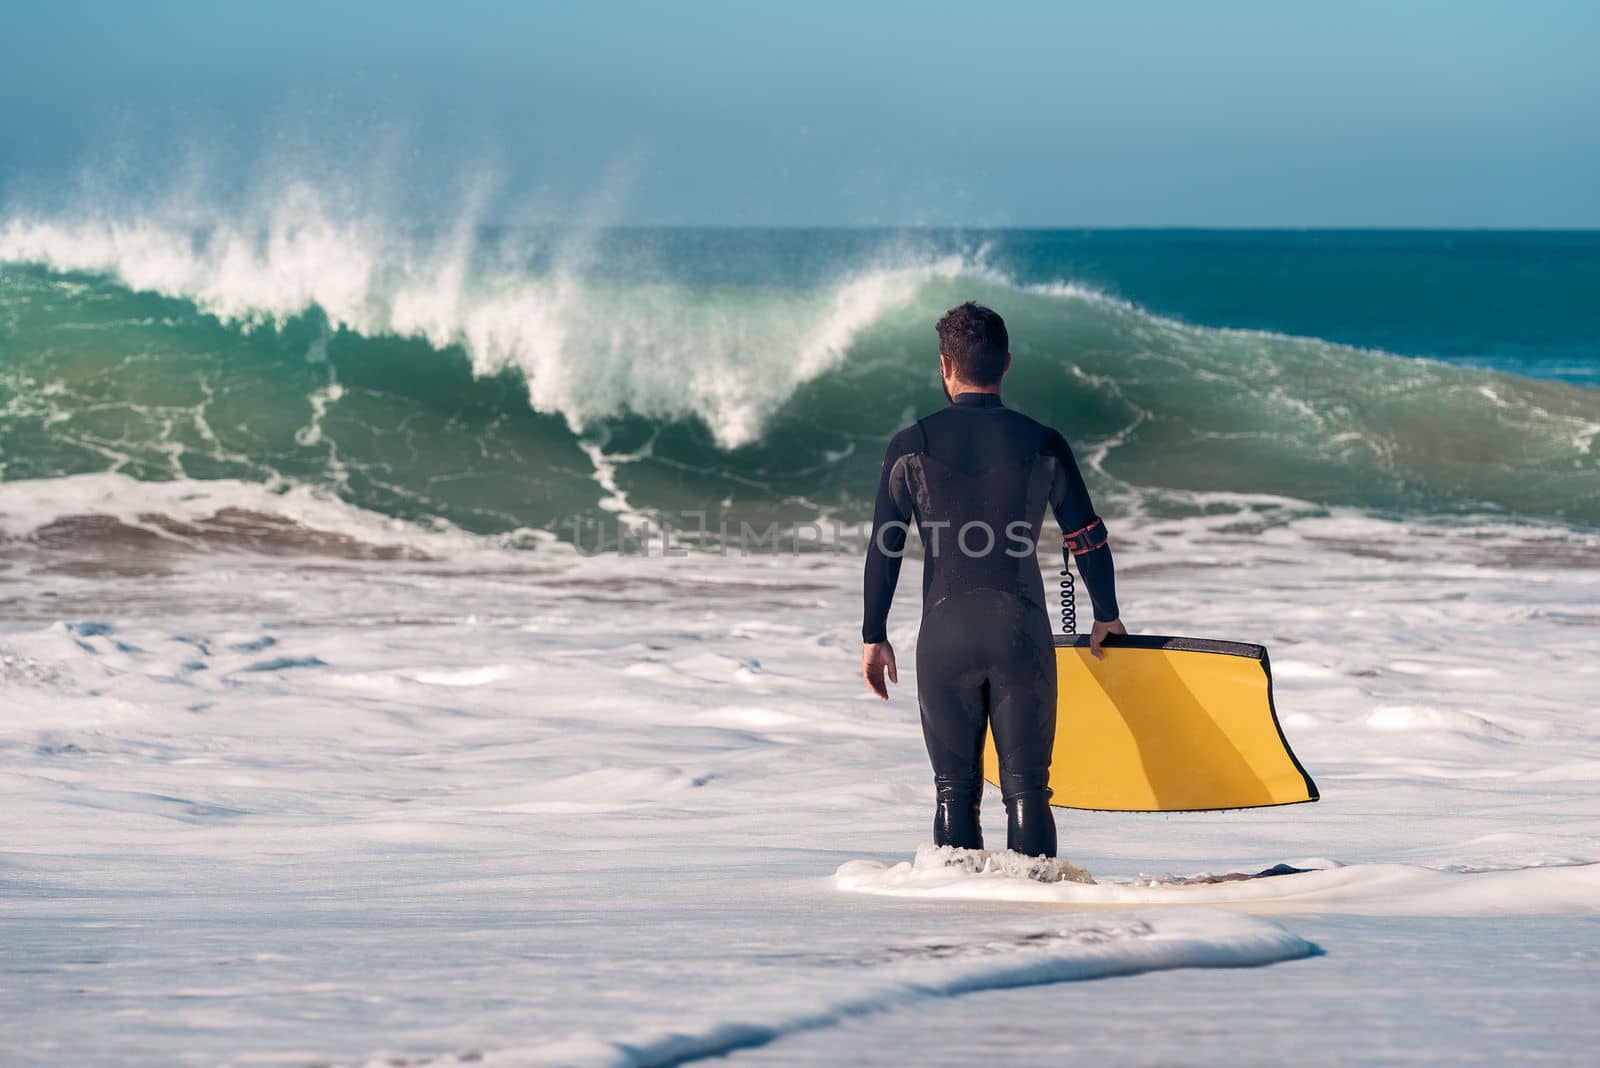 surfer with board watching big wave from the shore by raulmelldo